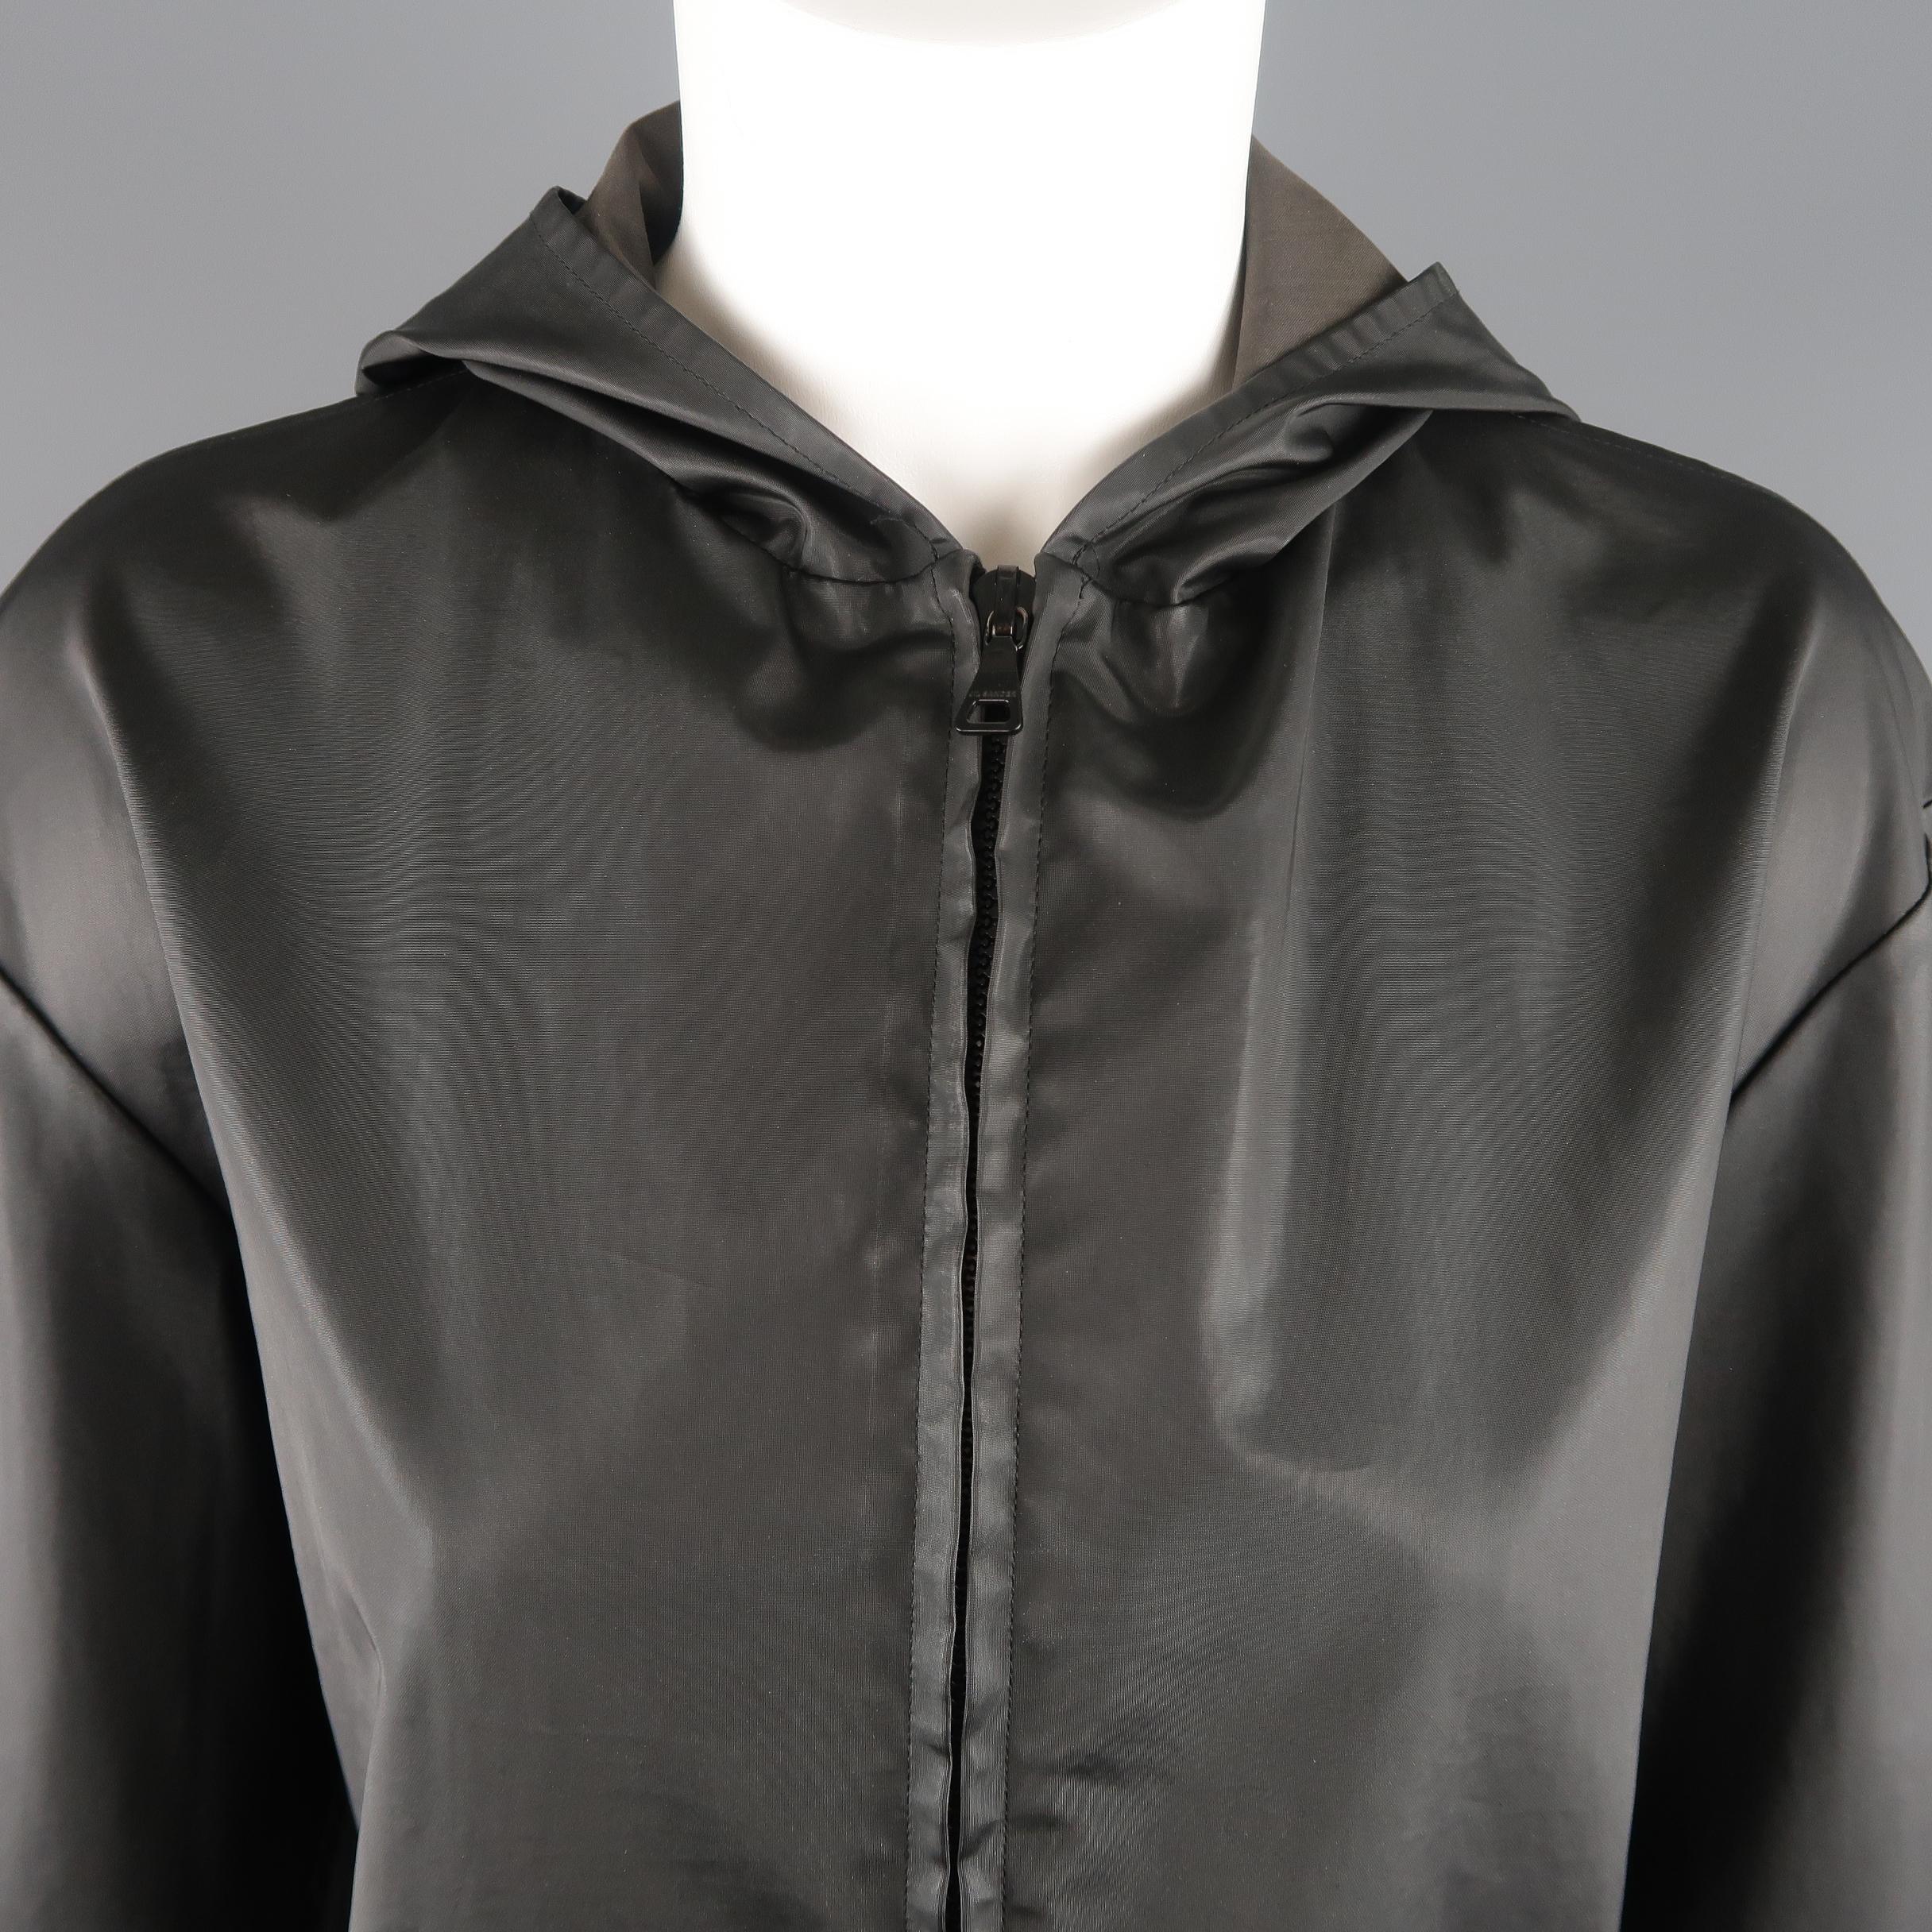 JIL SANDER hoodie comes in coated cotton canvas with a satin sheen featuring a double zip front, boxy silhouette, and slit pockets. Made in Italy.
 
Good Pre-Owned Condition.
Marked: IT 38
 
Measurements:
 
Shoulder: 19 in.
Bust: 42 in.
Sleeve: 22